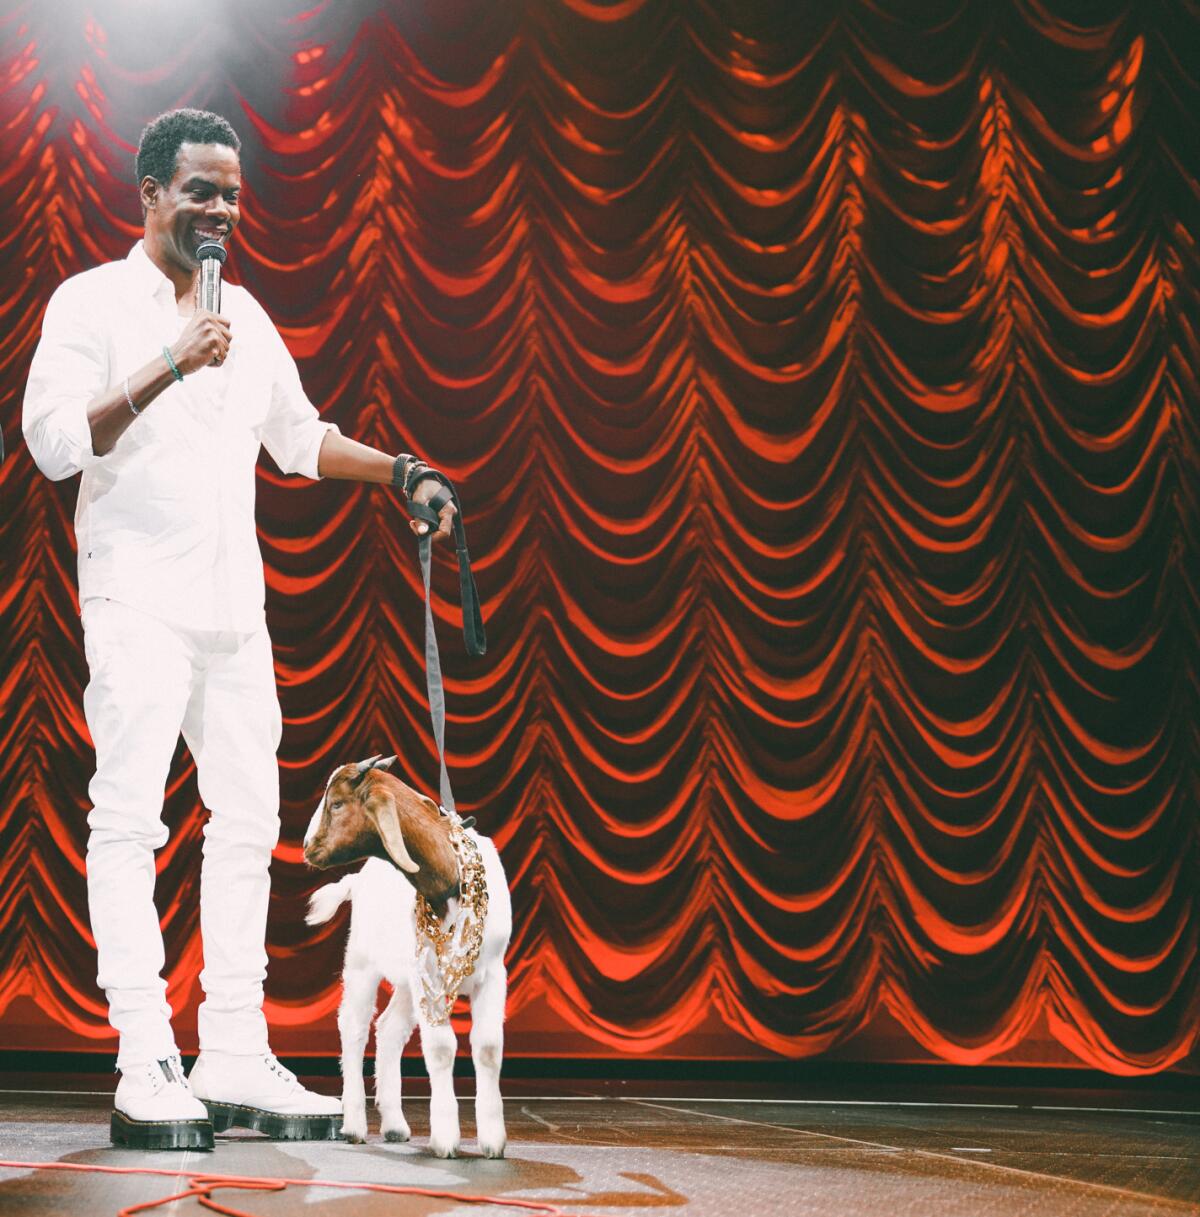 A Black man in a white outfit holds a microphone in one hand and a goat on a leash in the other